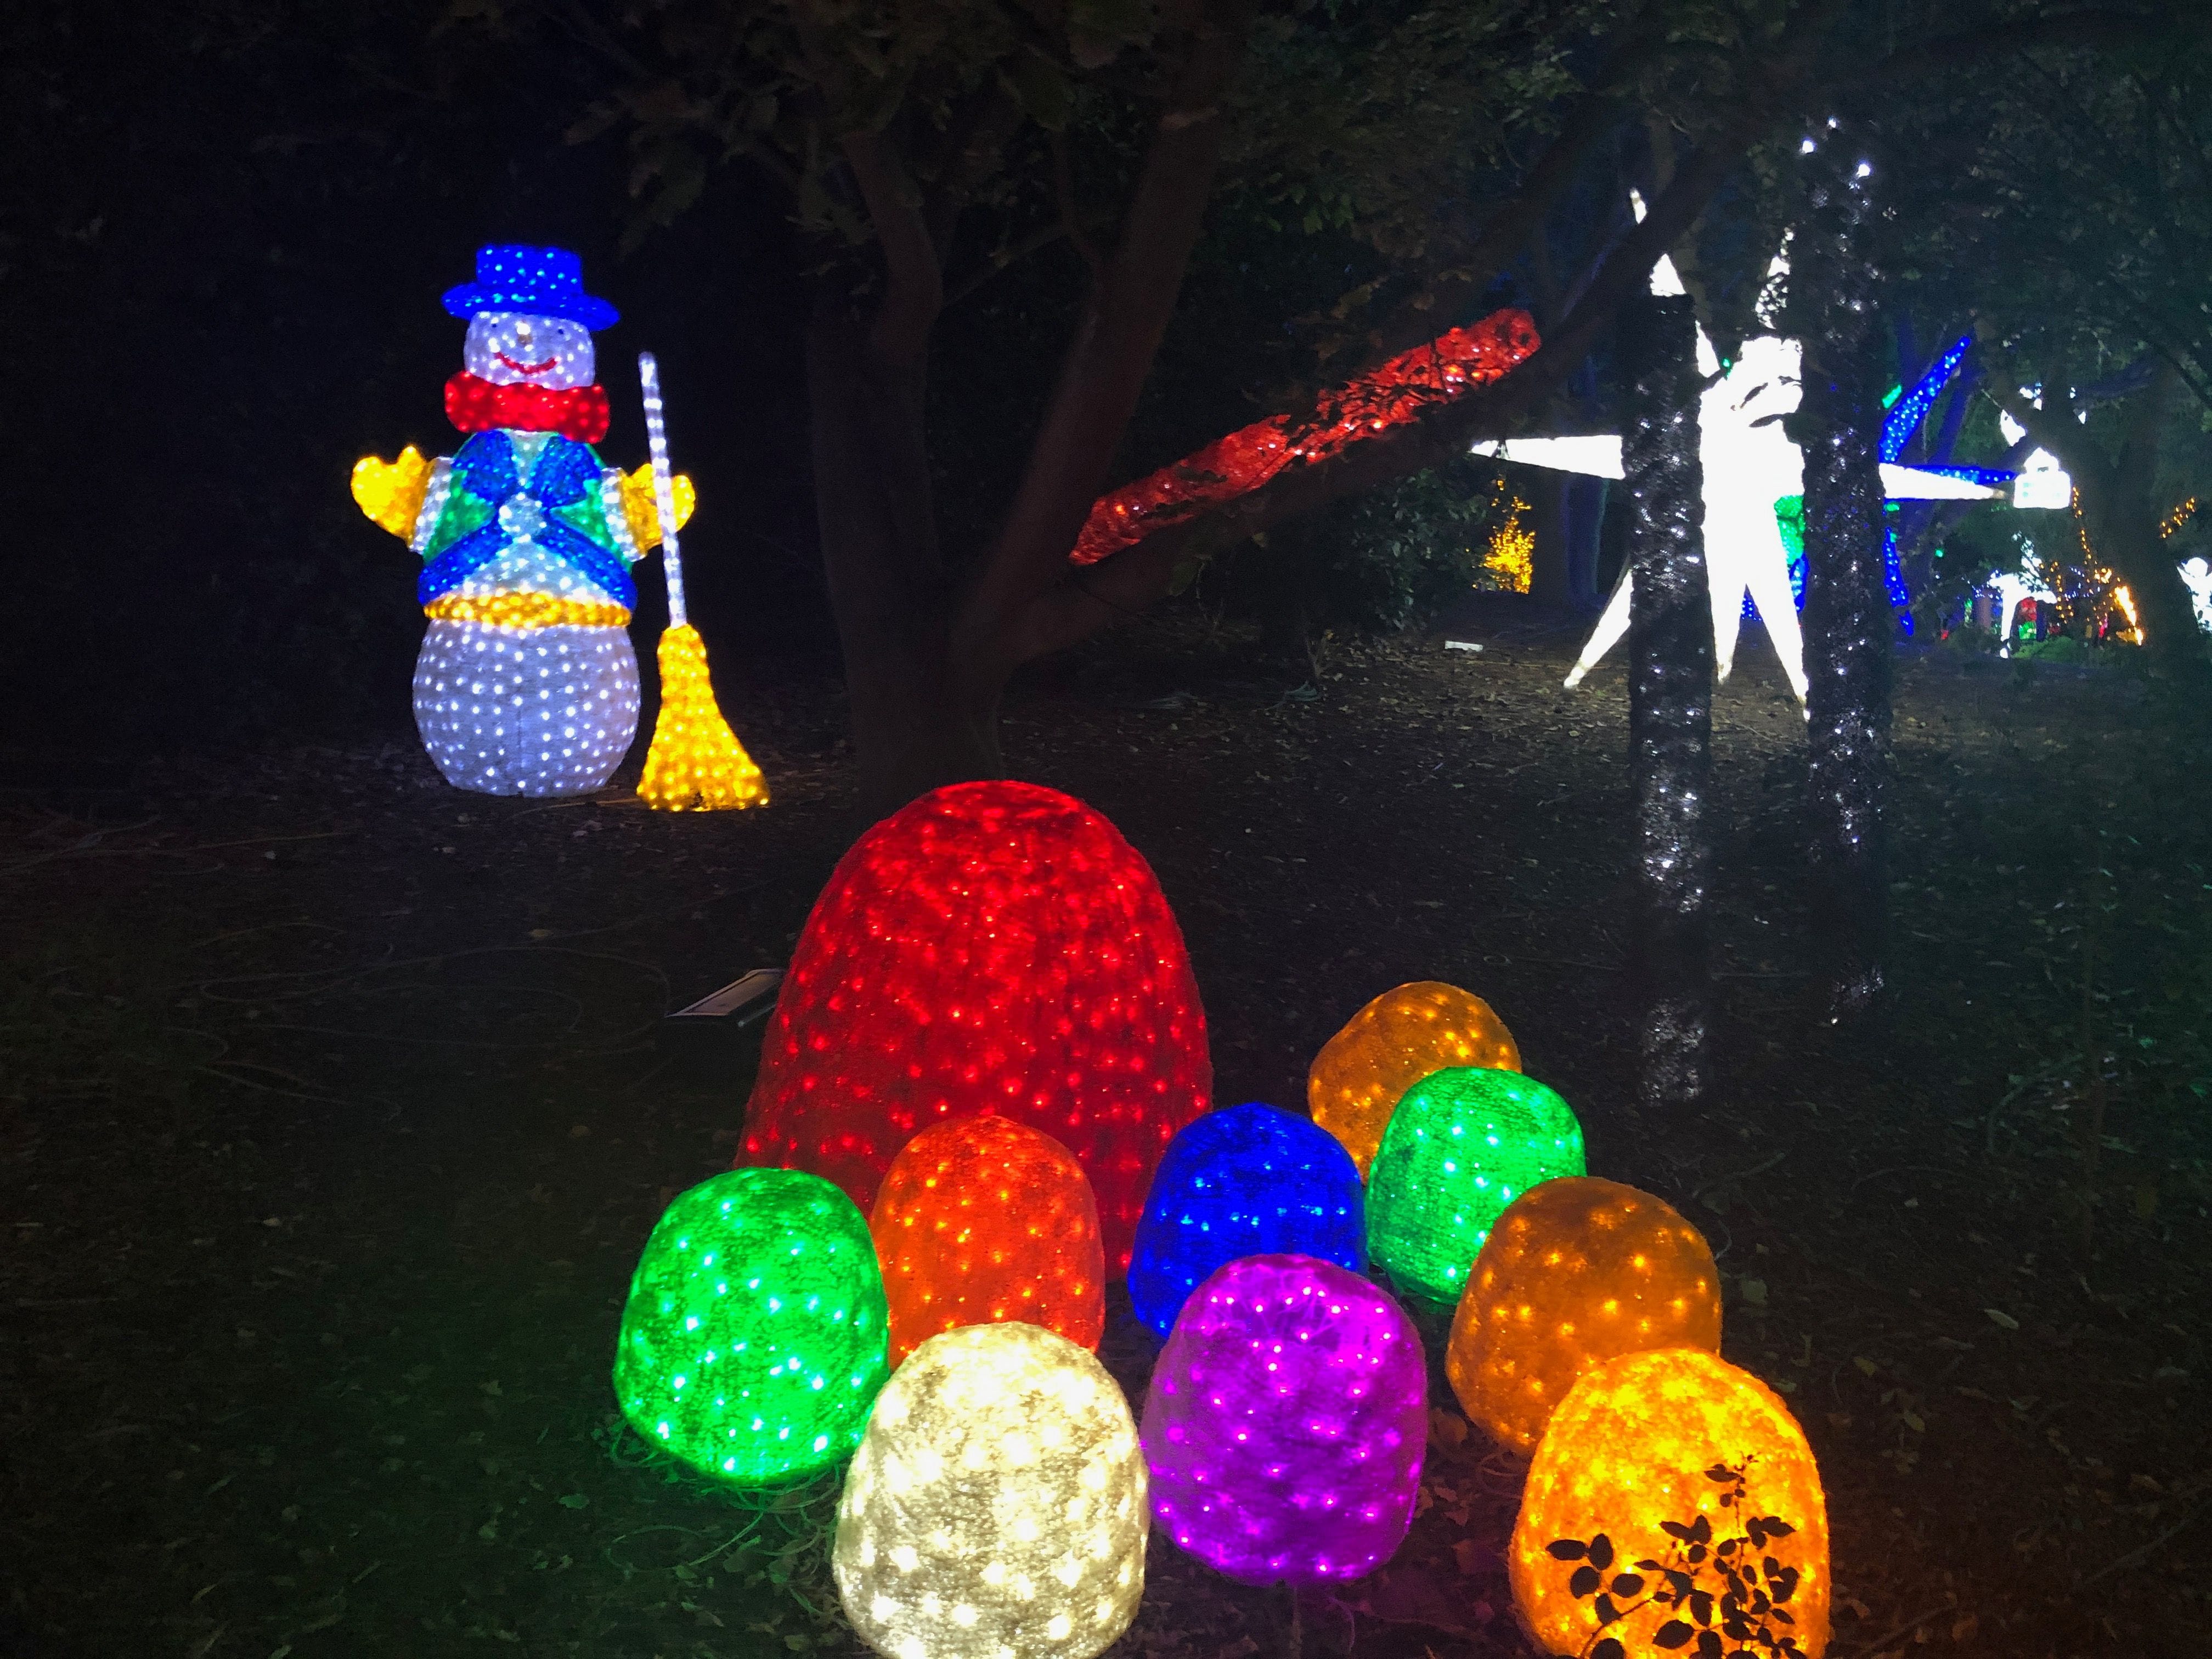 Hunter Valley Christmas Lights Spectacular 2019 Image -5e9b6f9a184ad